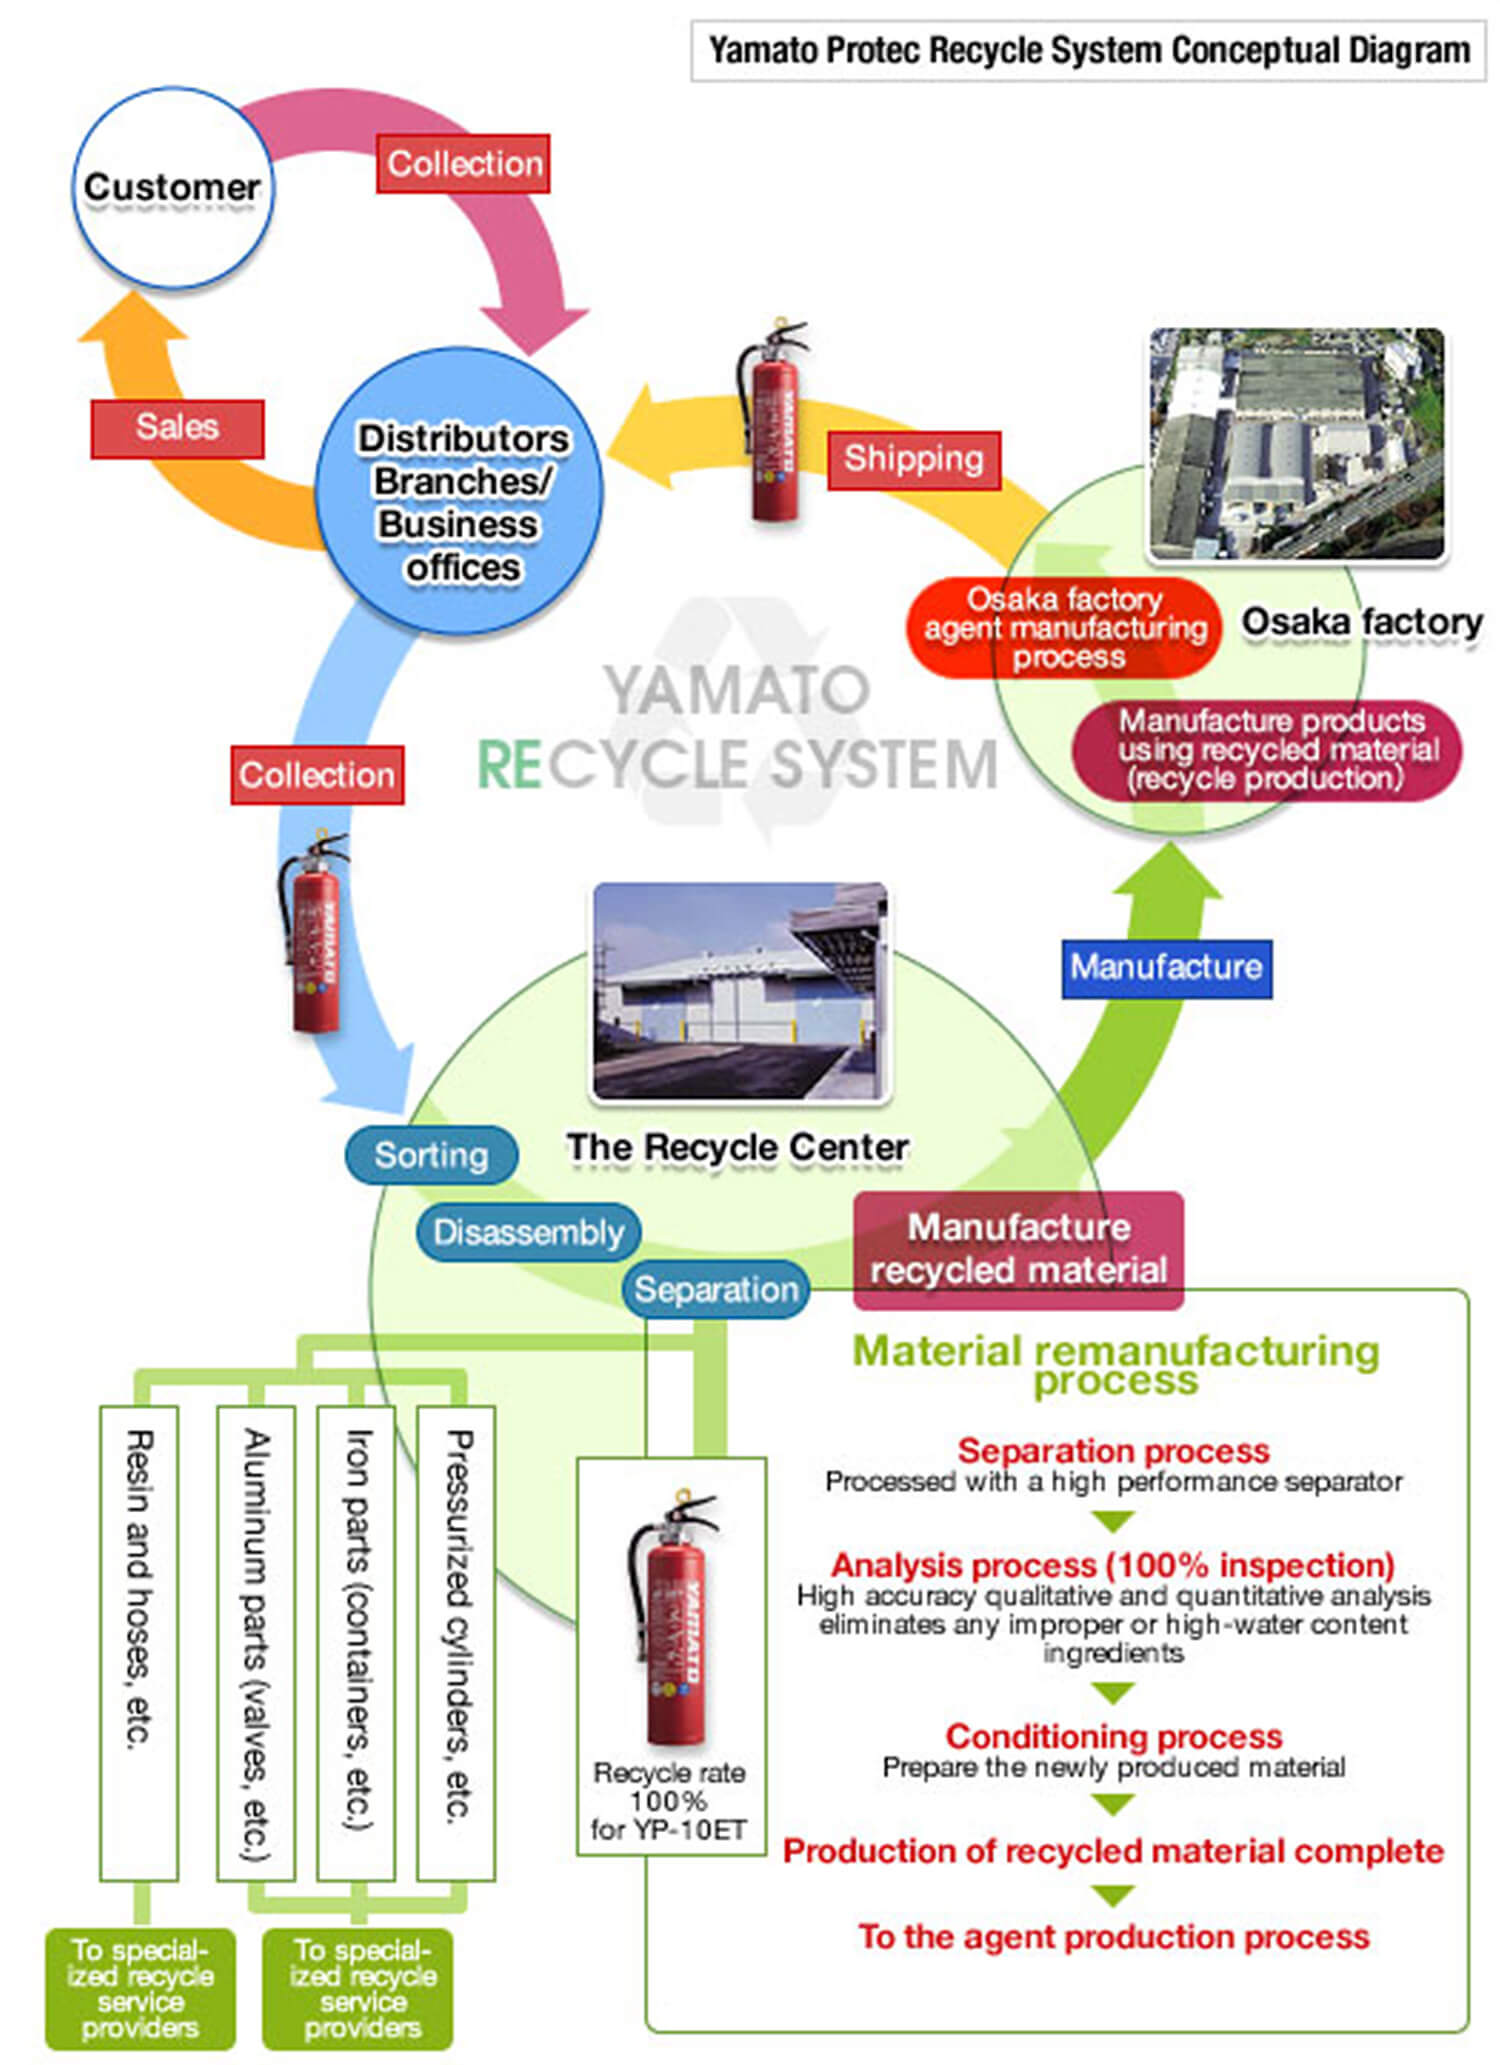 Yamato Protec Recycle System Conceptual Diagram